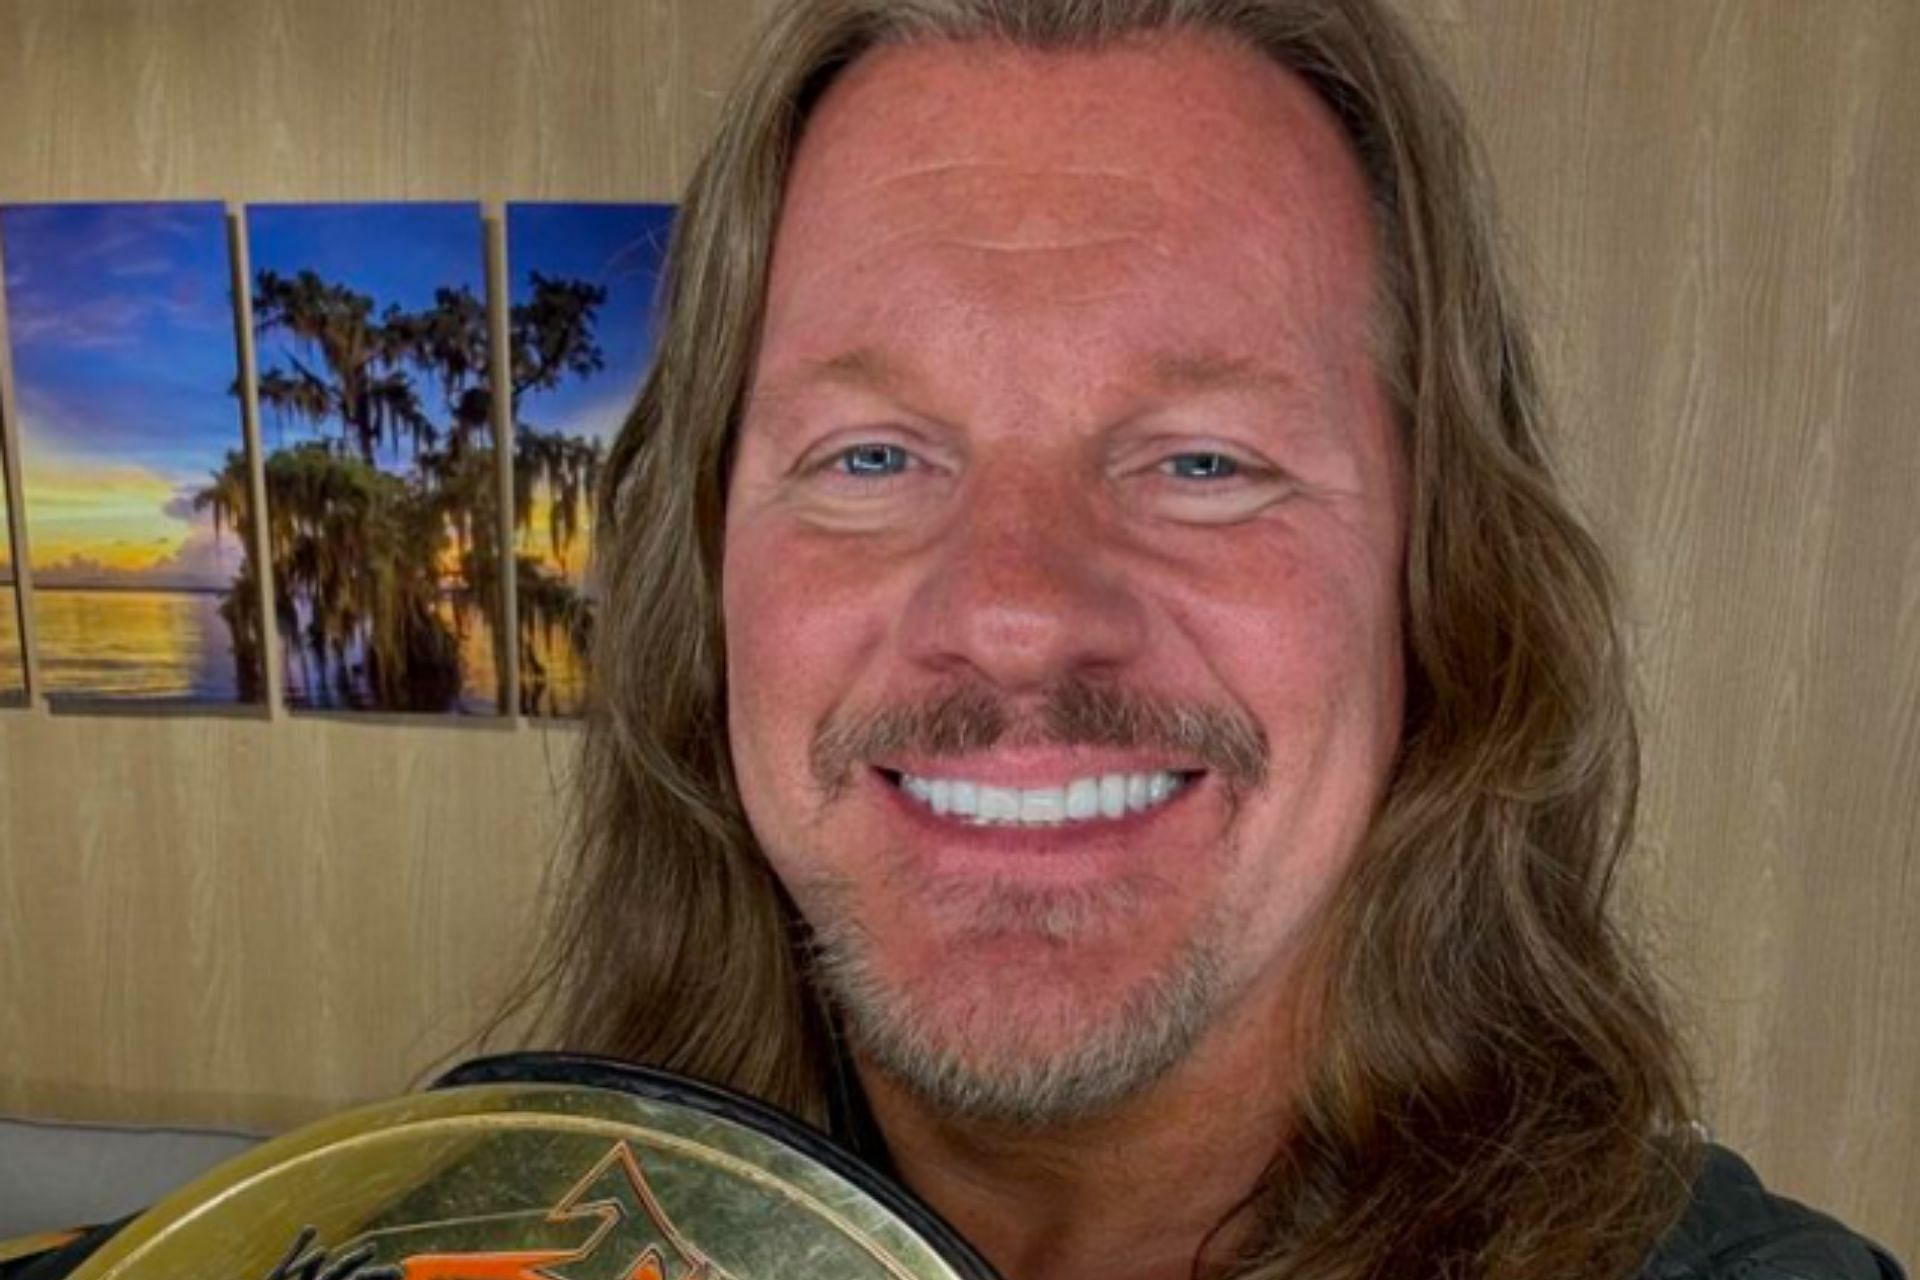 Wrestling enttites are speaking out about Chris Jericho